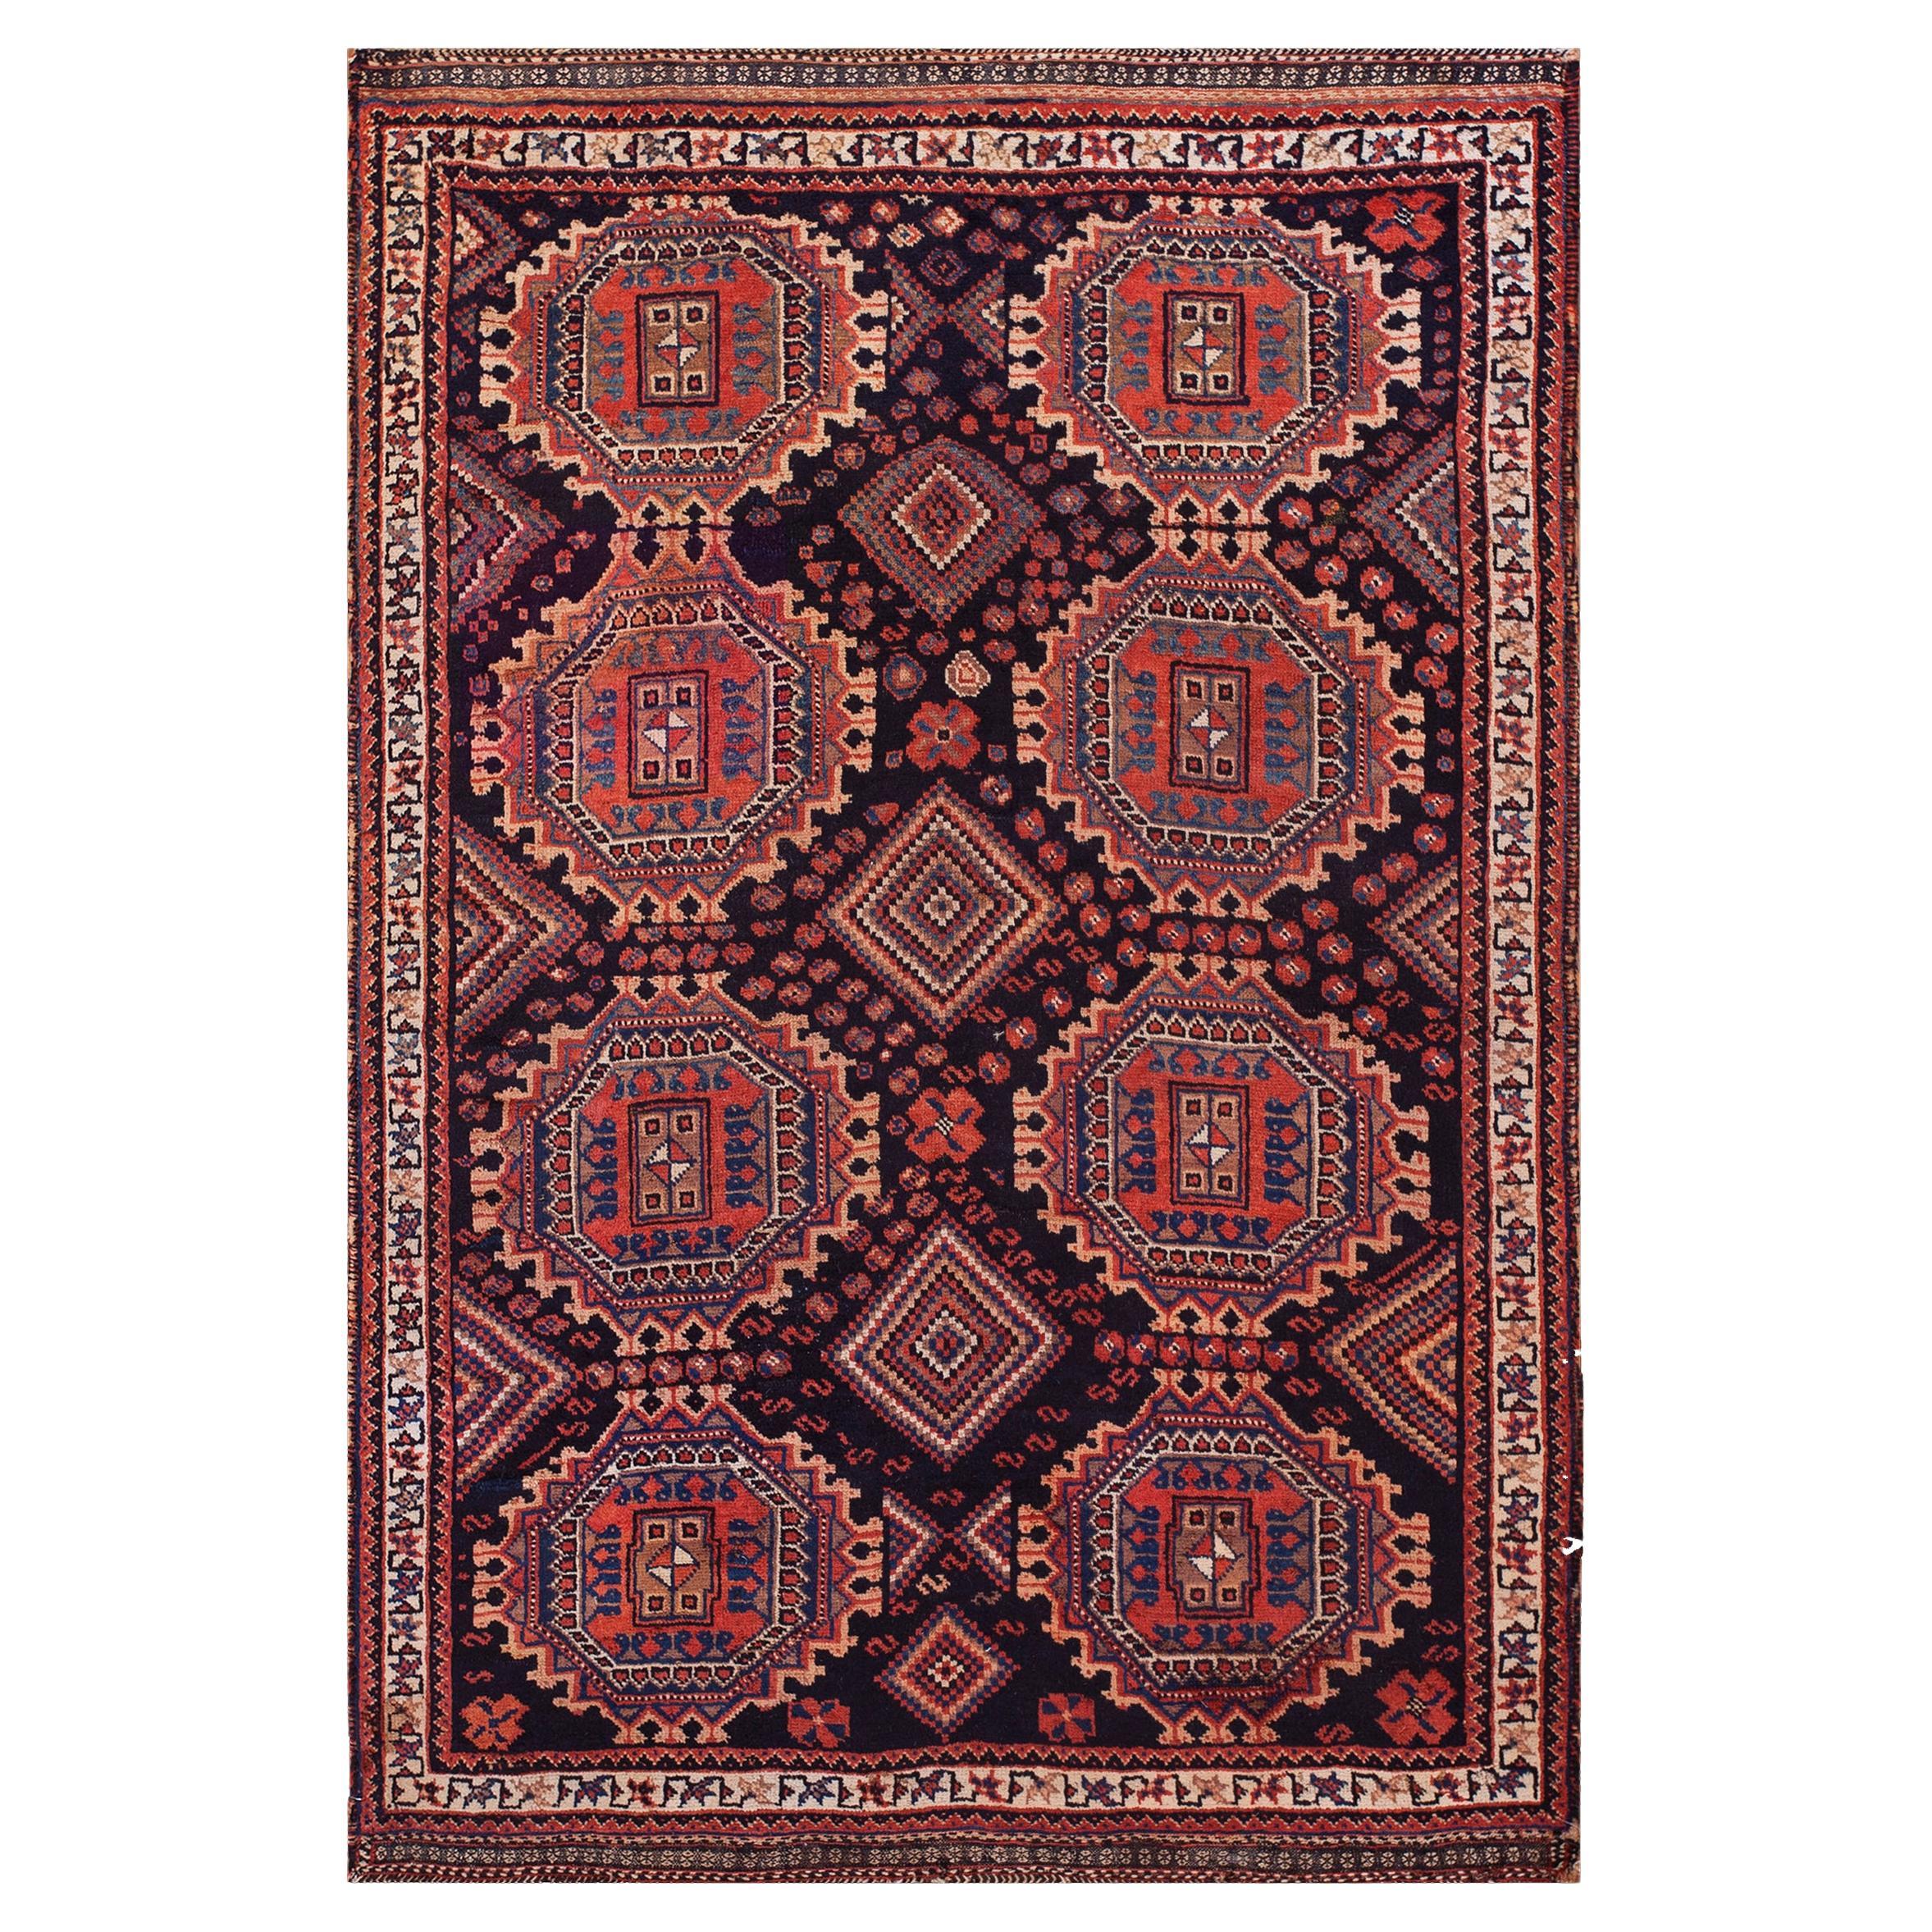 Early 20th Century S.E. Persian Afshar Carpet ( 4'6" x 6'6" - 137 x 198 ) For Sale